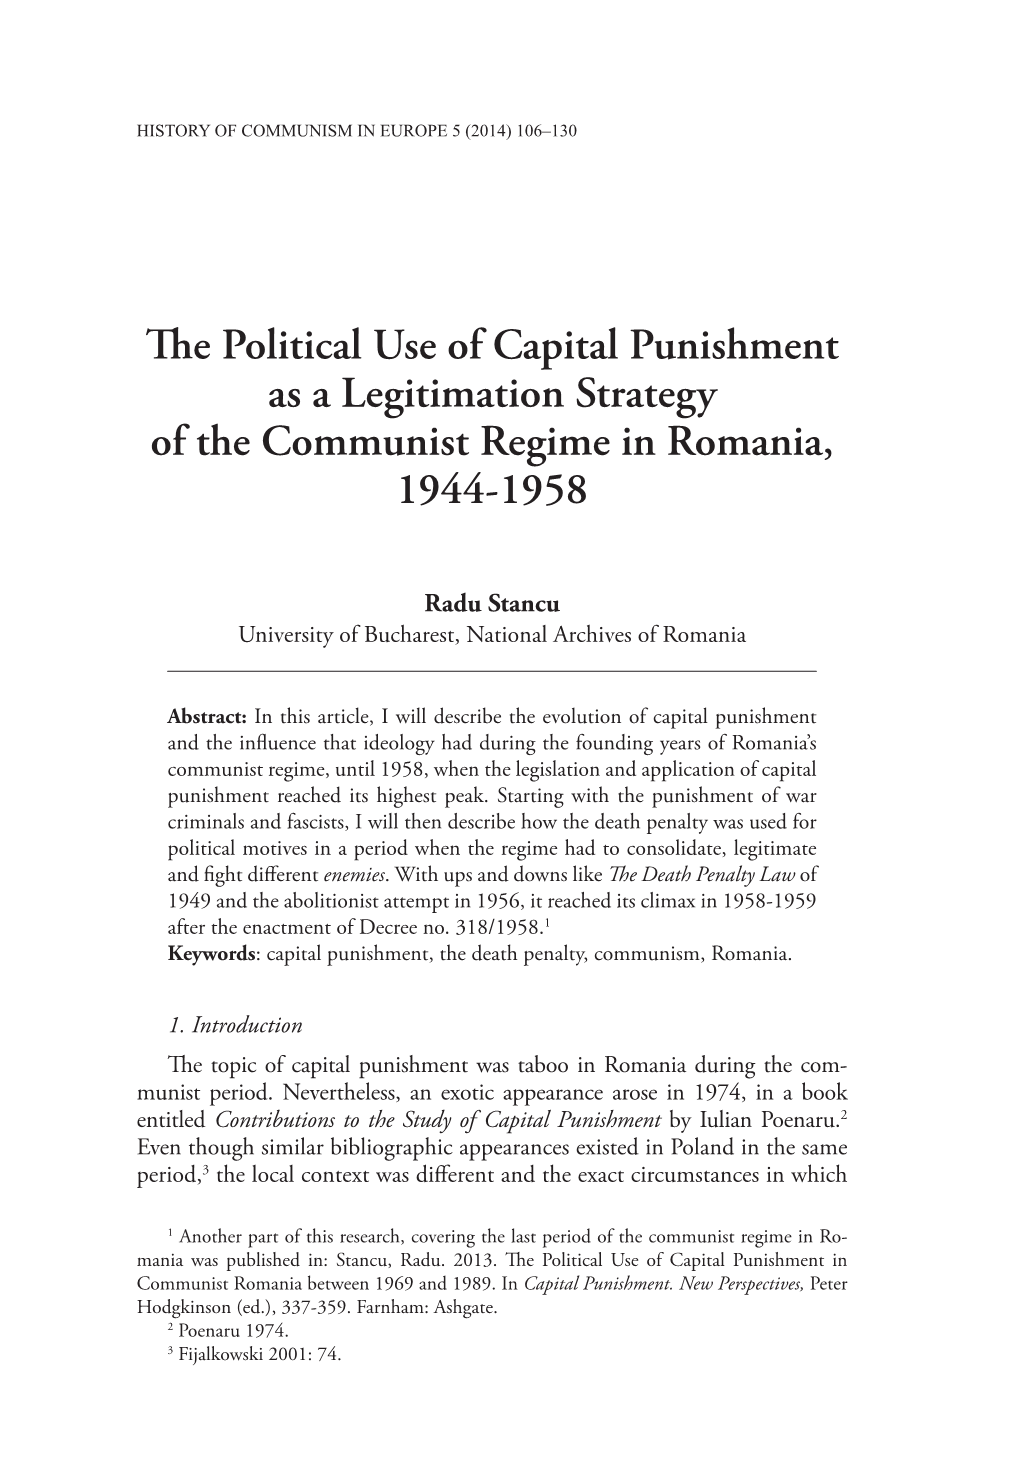 The Political Use of Capital Punishment As a Legitimation